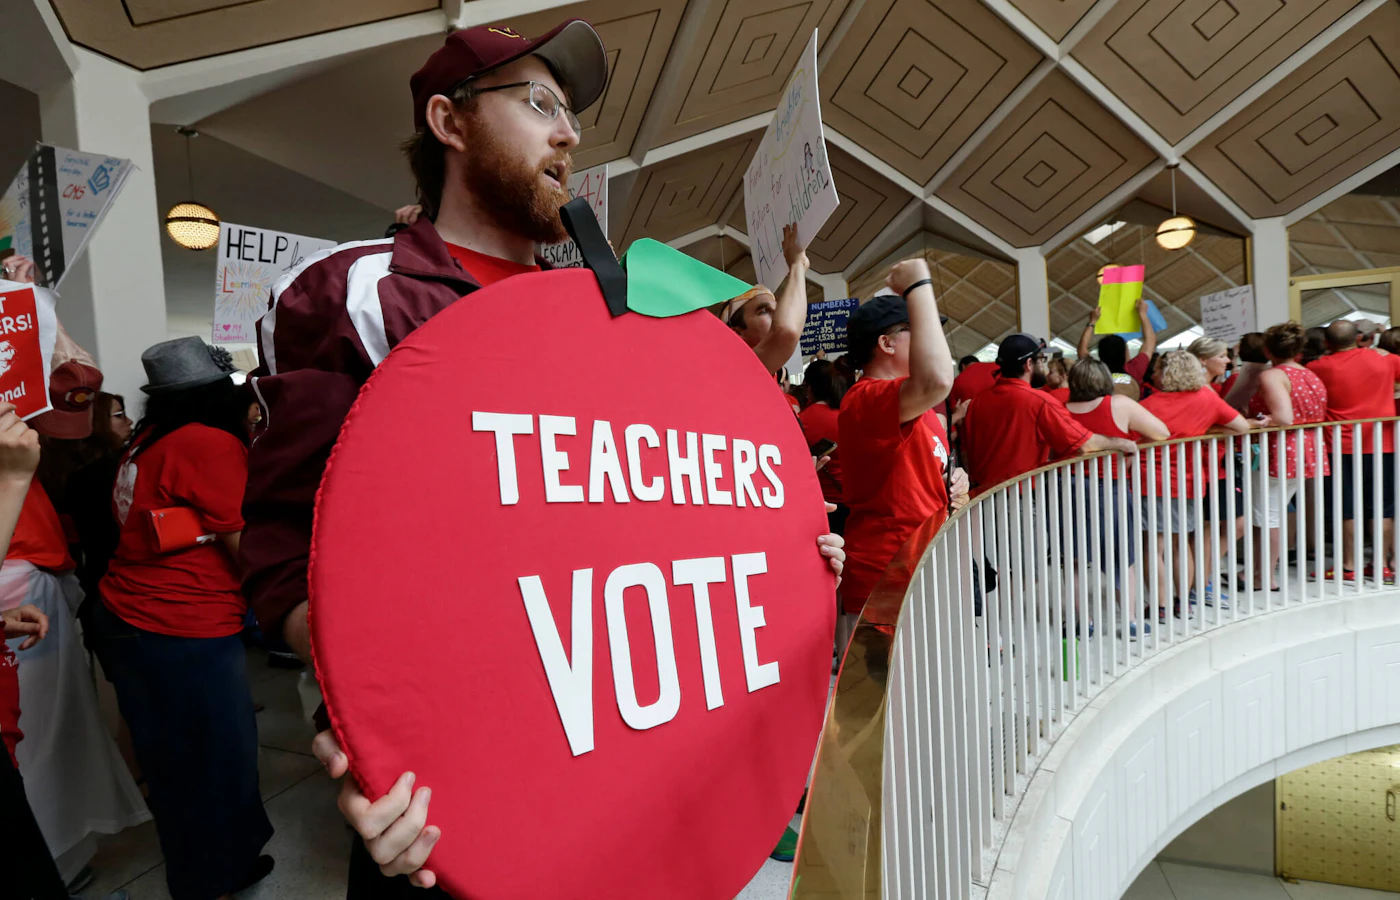 North Carolina public school teachers have been fighting for adequate raises and overall school funding for years. Here, a rally at the General Assembly in Raleigh, N.C., in May 2018. (AP Photo/Gerry Broome)